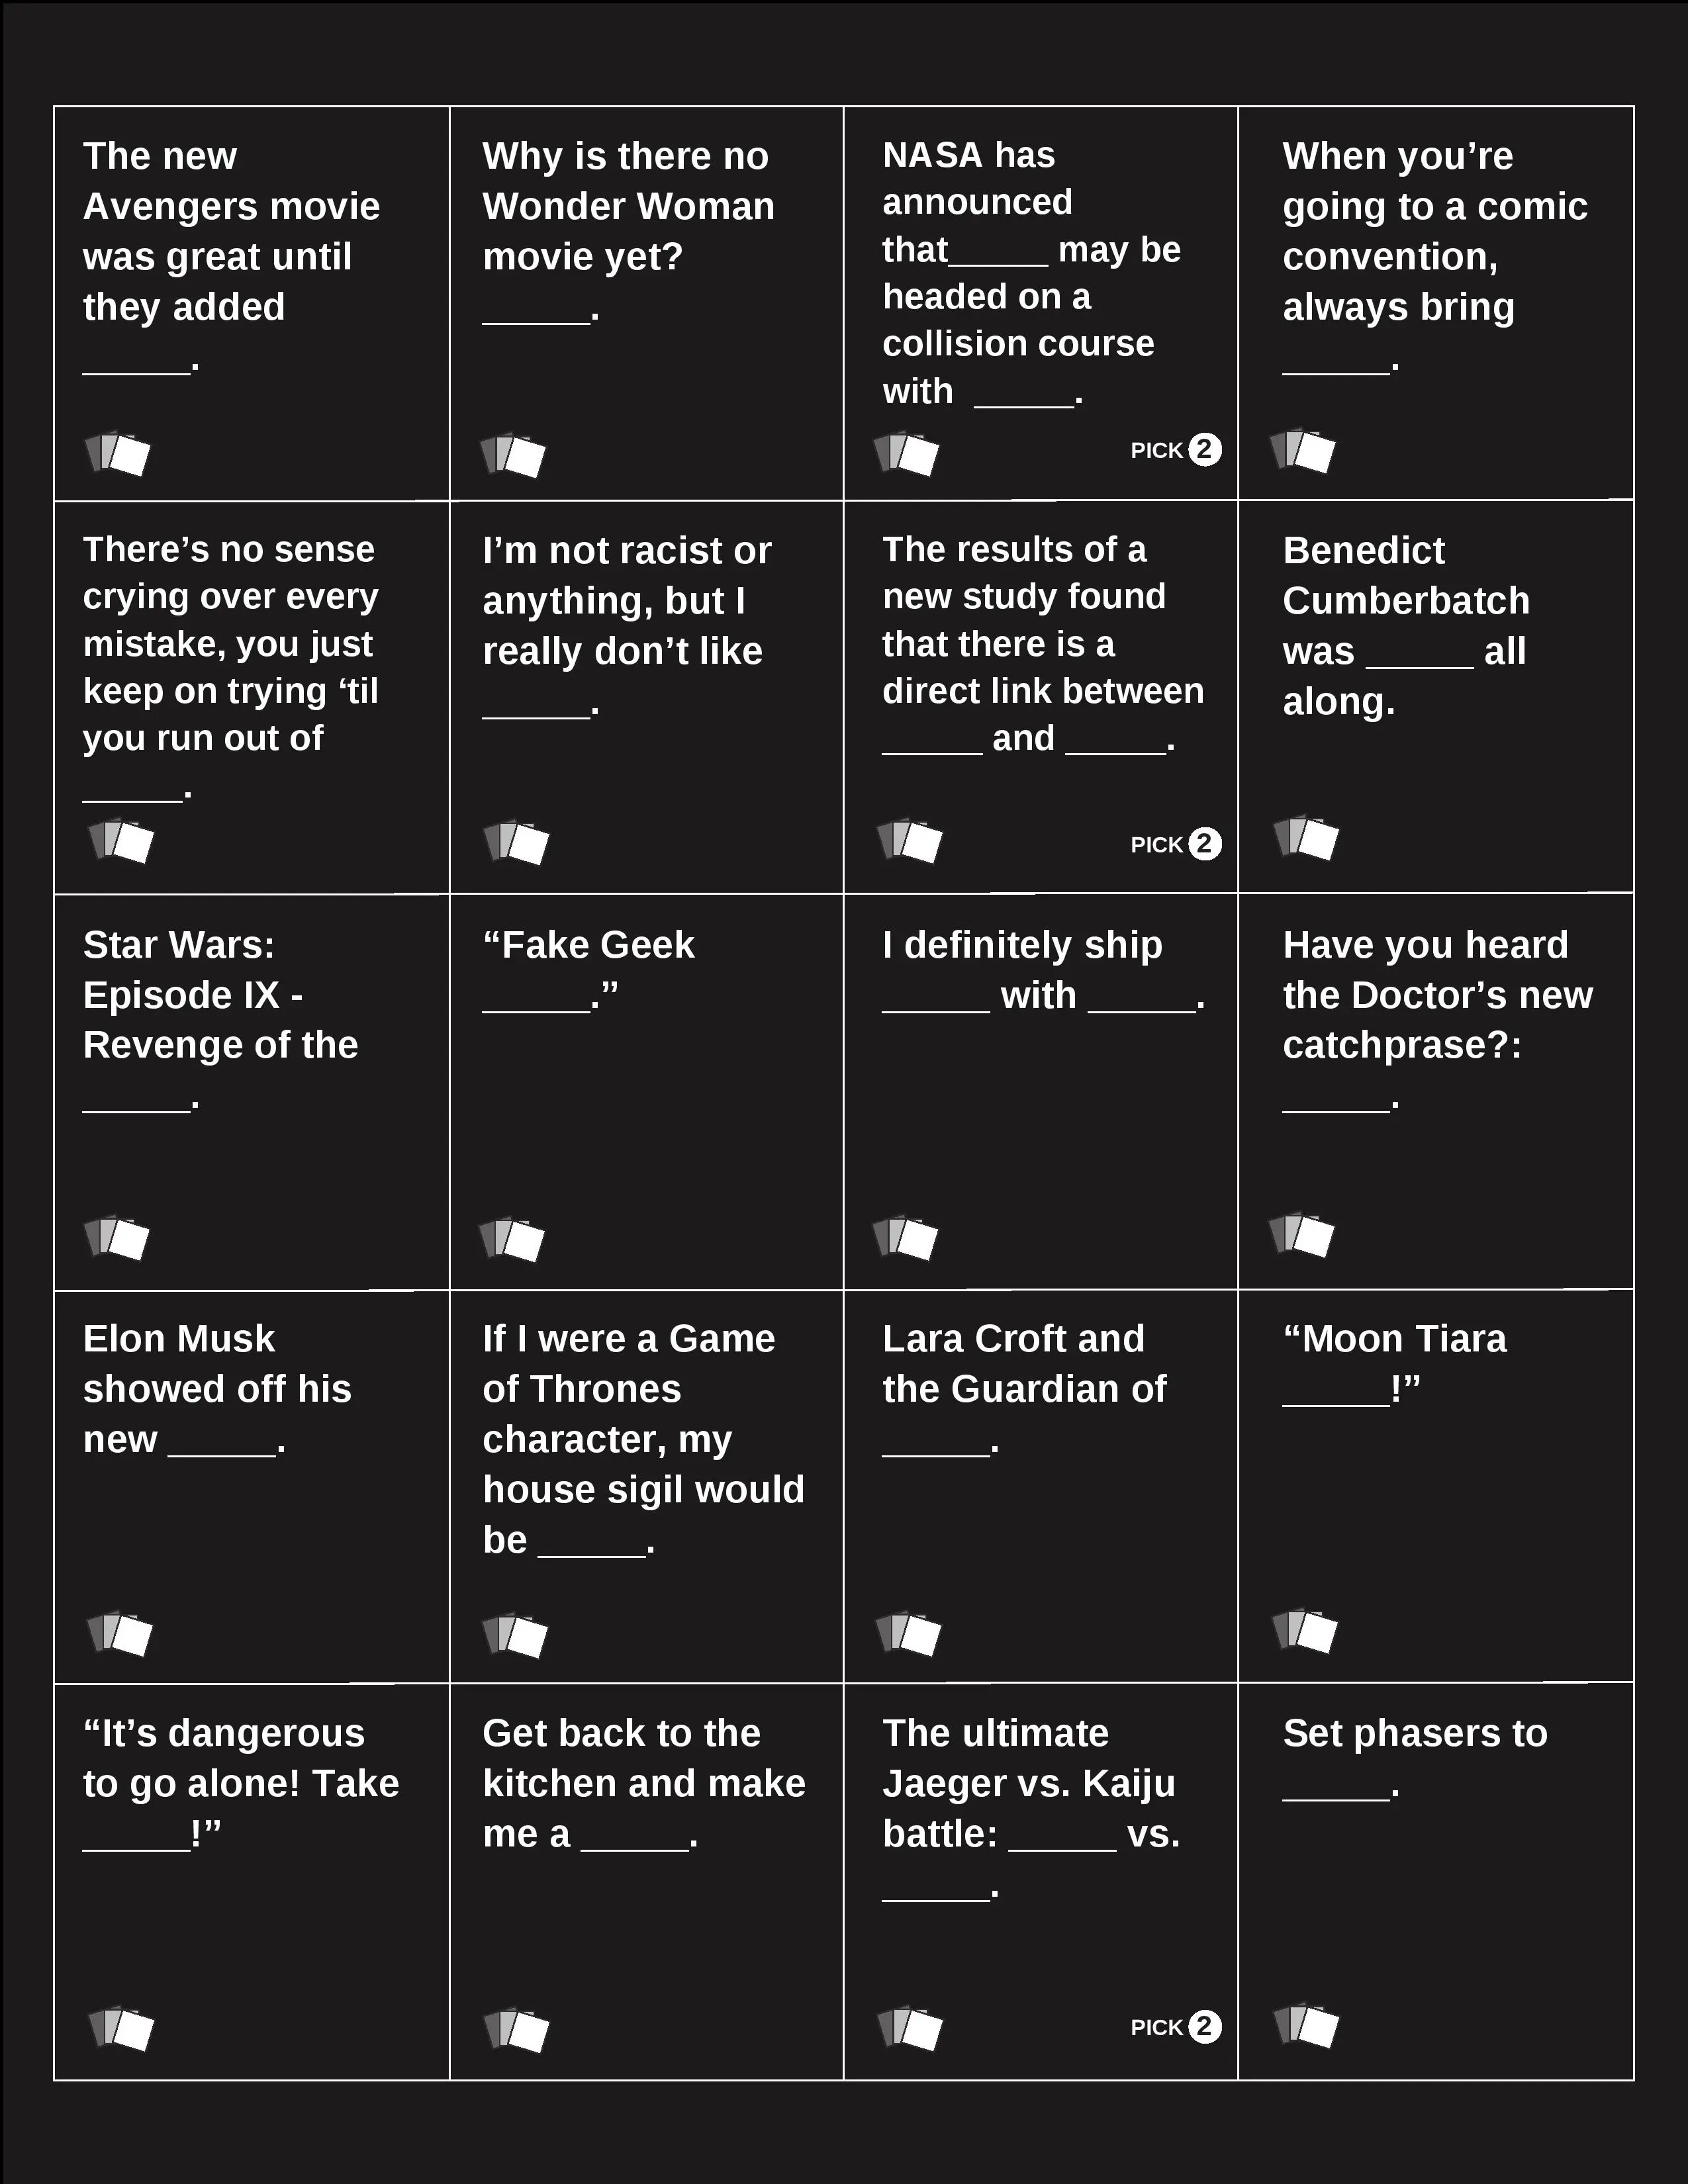 The Mary Sue Cards Against Humanity The Mary Sue